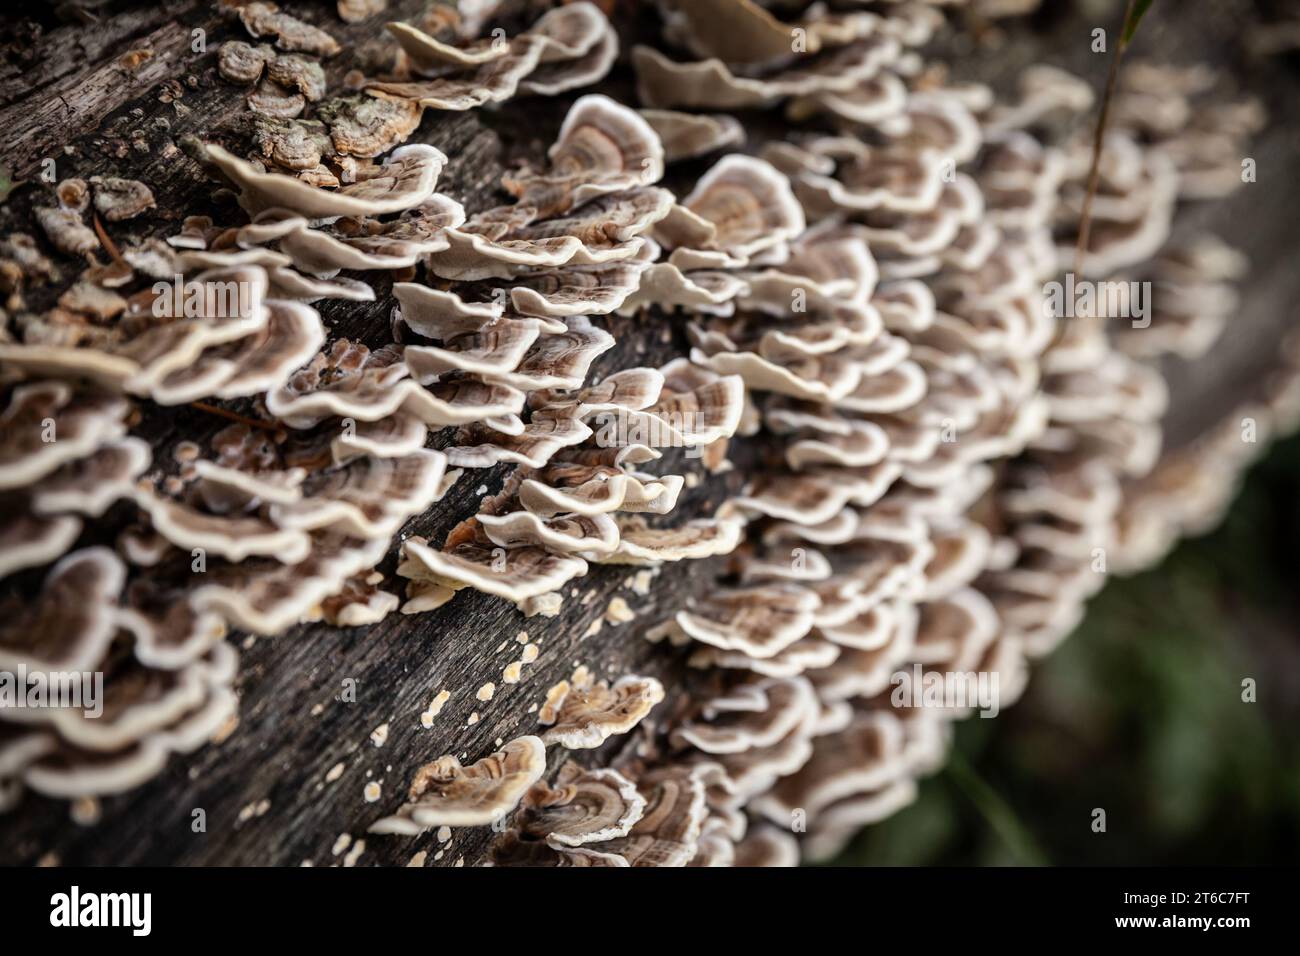 Picture of a wood decay fungus, a turkey tail mushroom. A wood-decay or xylophagous fungus is any species of fungus that digests moist wood, causing i Stock Photo